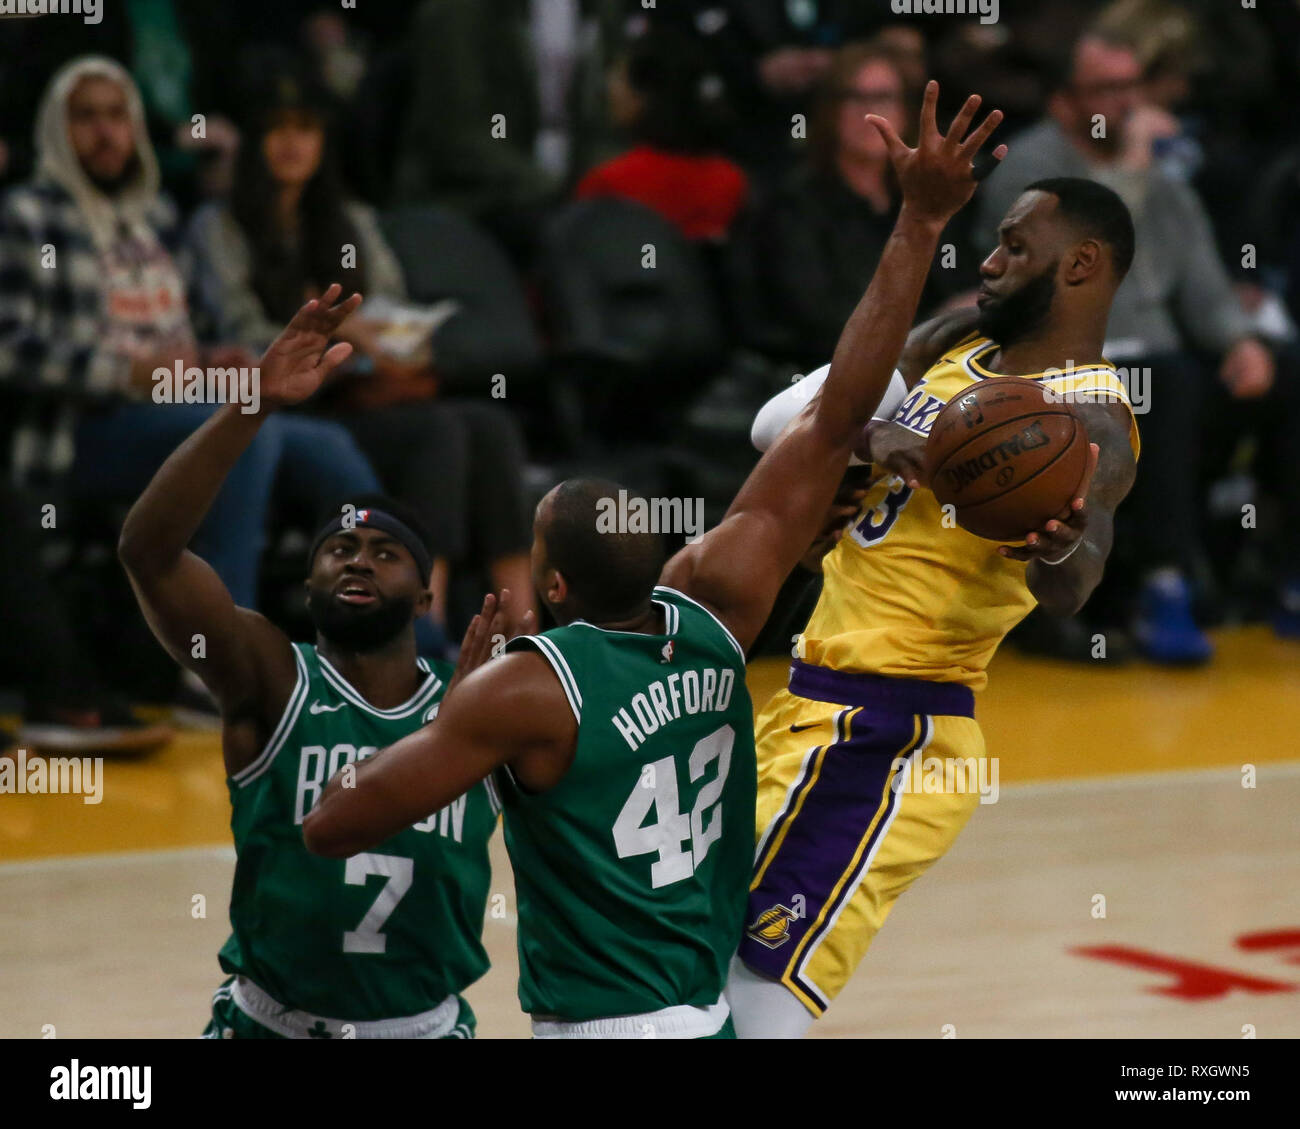 Los Angeles Lakers forward LeBron James #23 passing in traffic during the Boston Celtics vs Los Angeles Lakers game at Staples Center in Los Angeles, CA on March 09, 2019. (Photo by Jevone Moore) Stock Photo